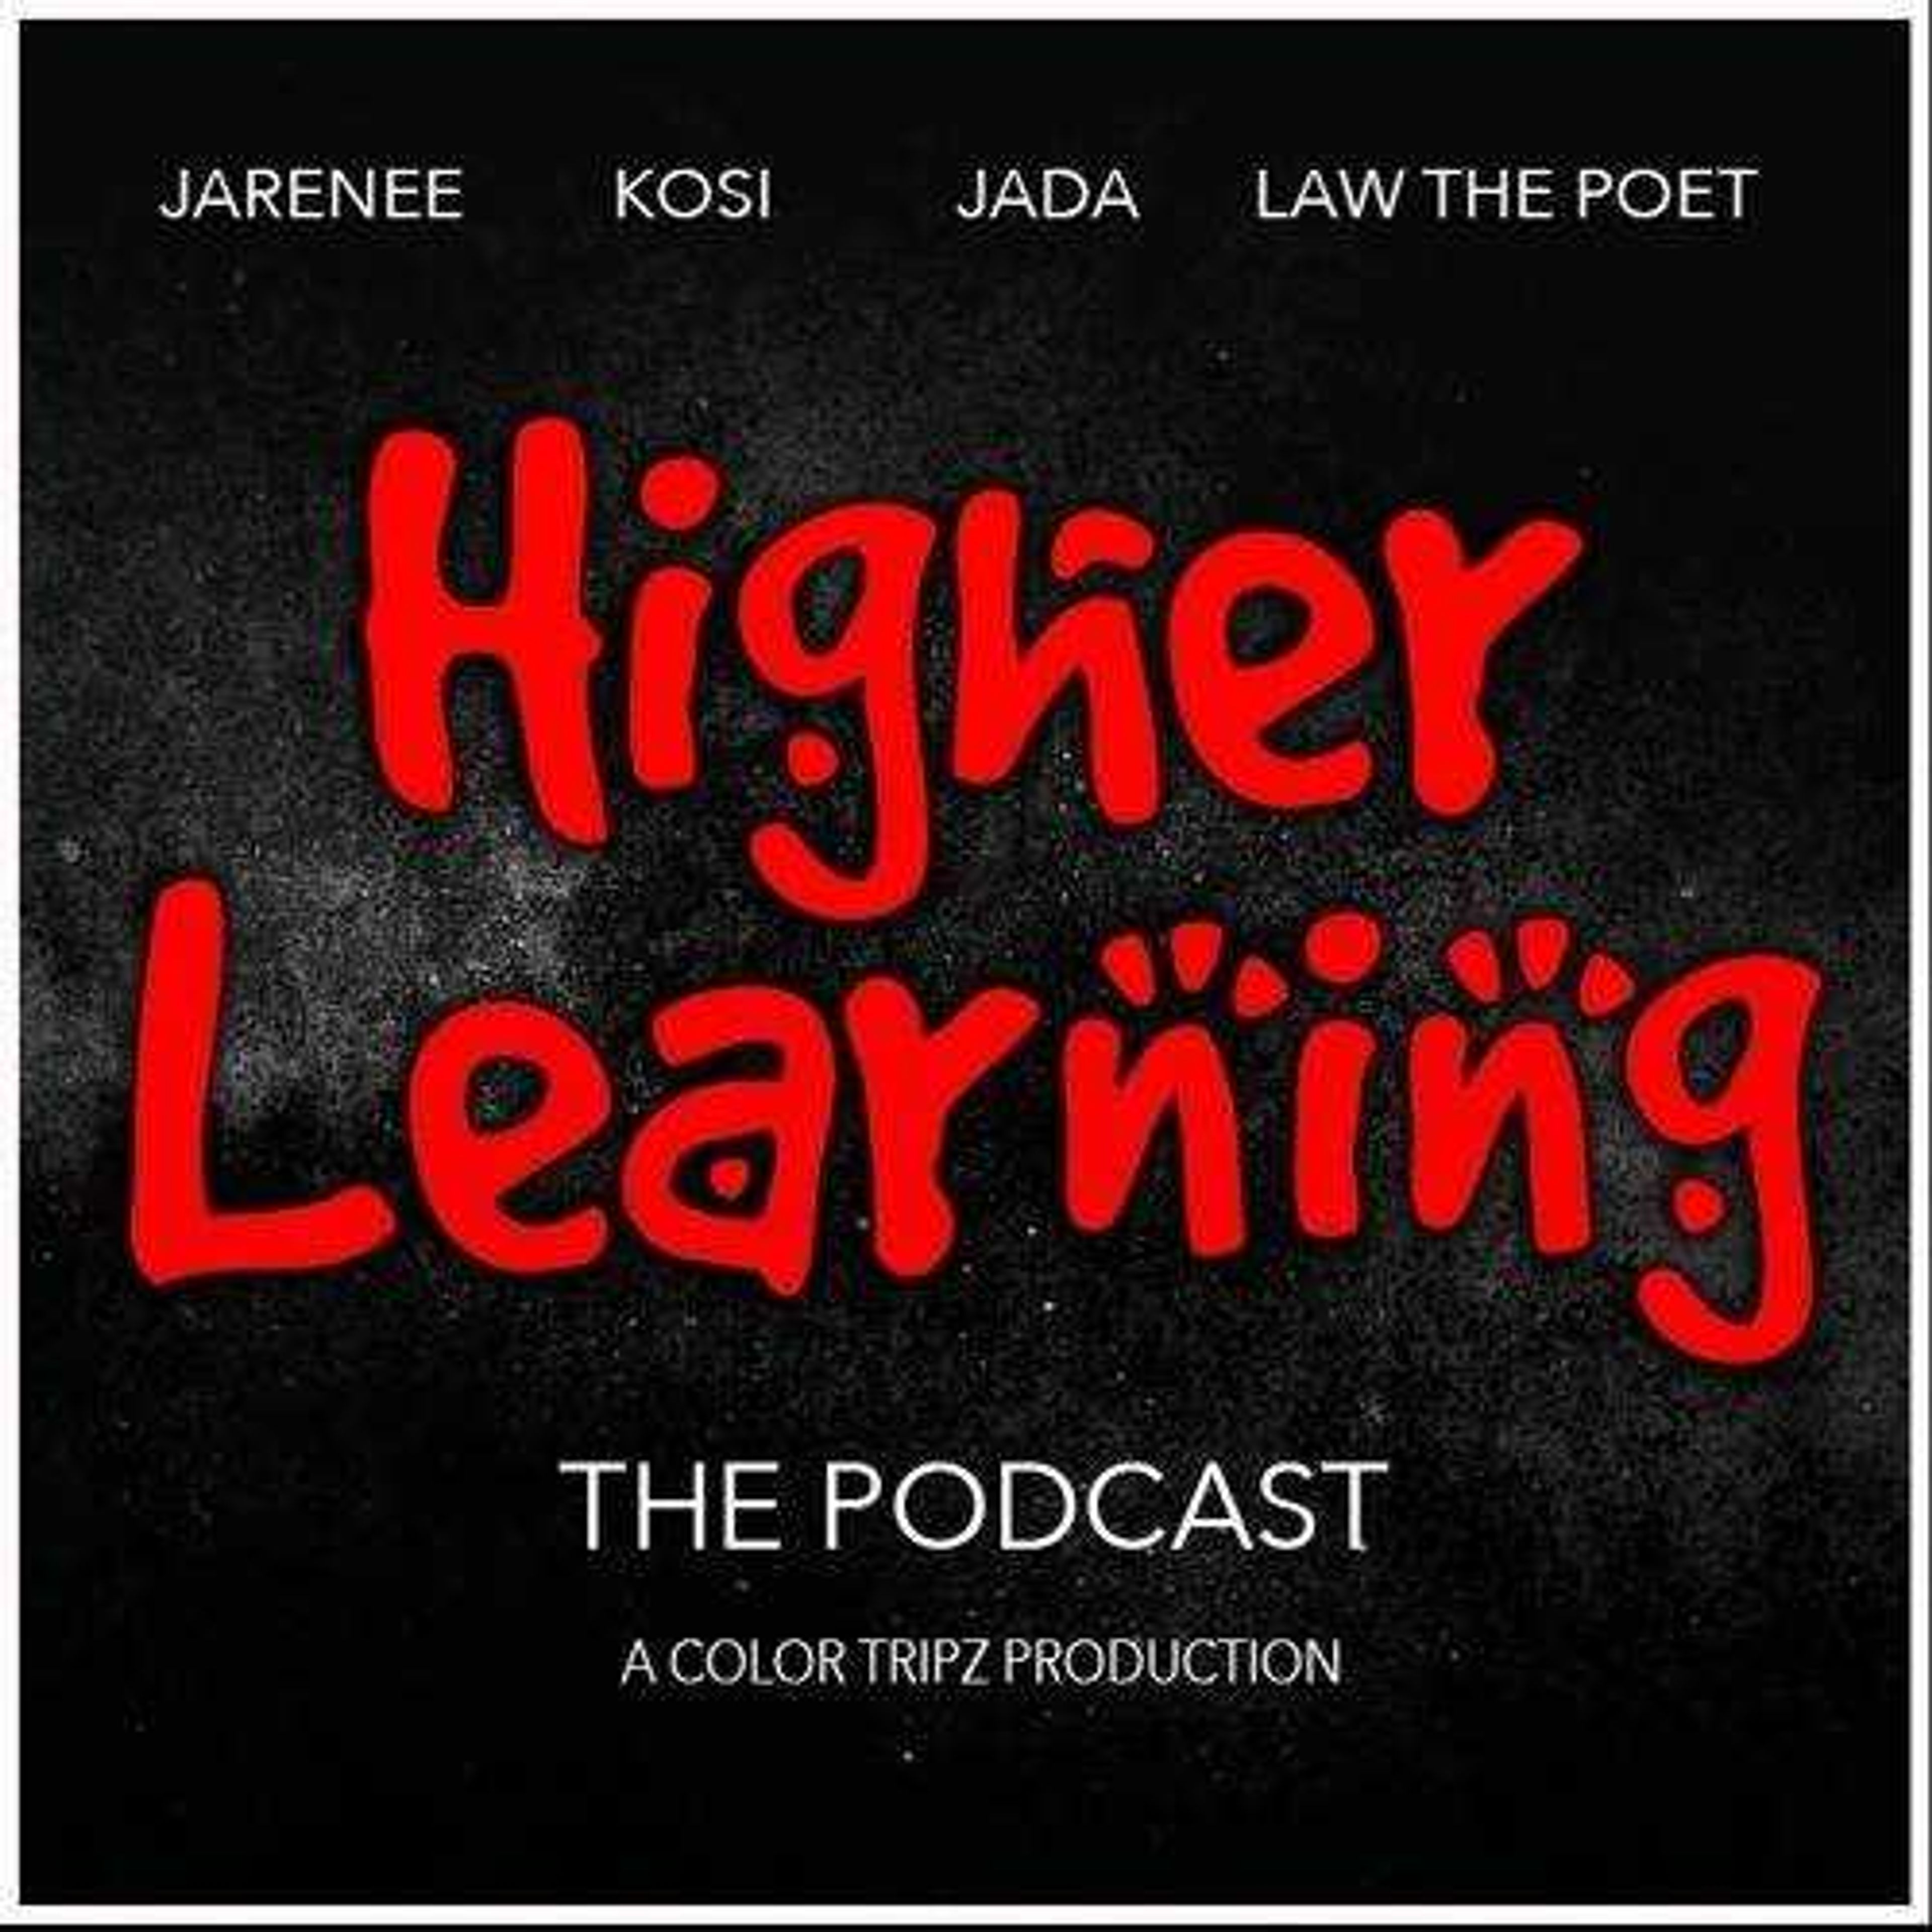 Expanding art through Higher Learning podcast